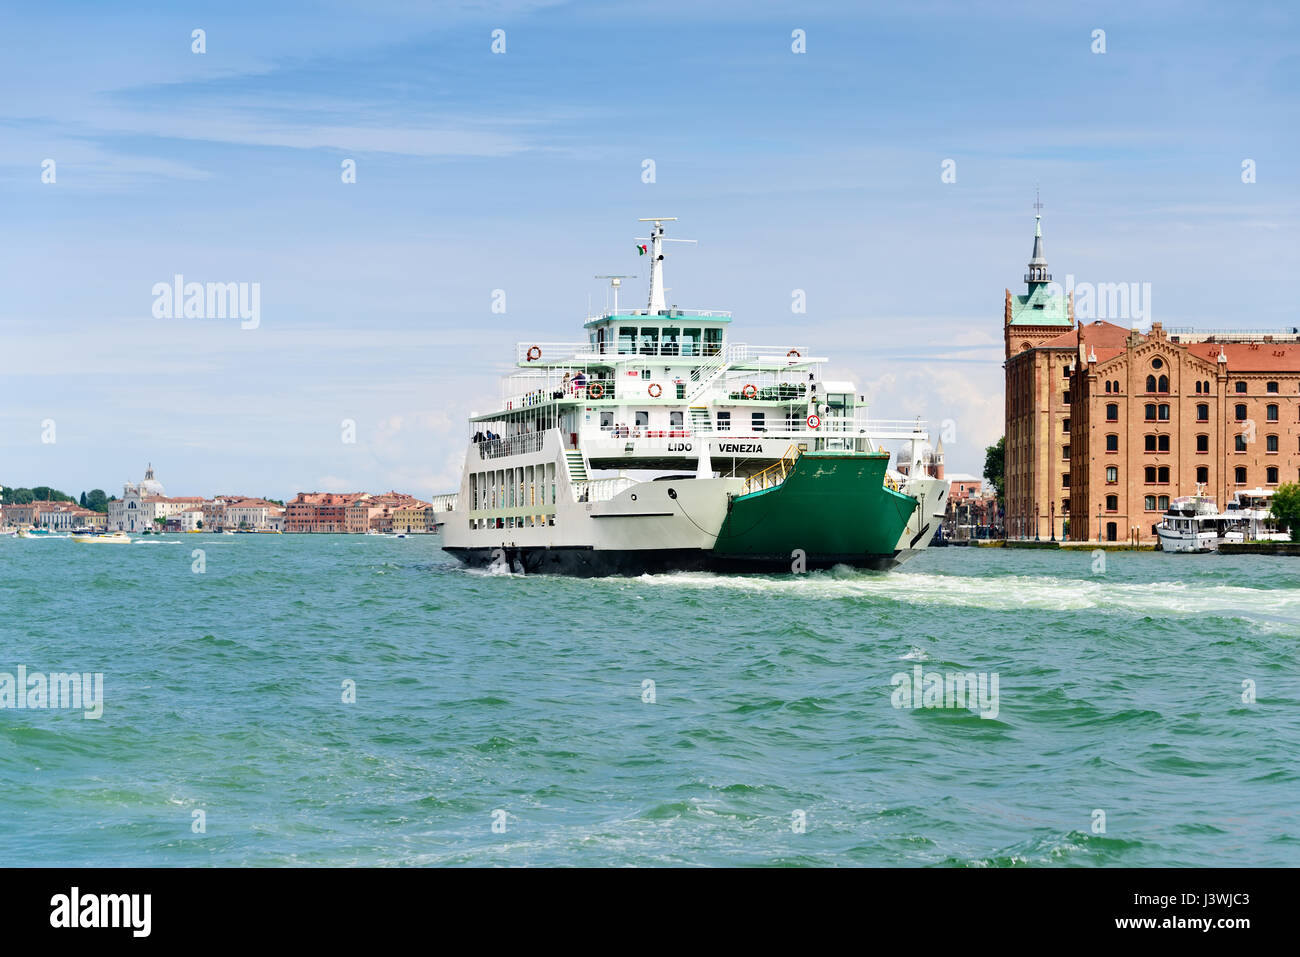 Venice, Italy - June 14, 2016: The Lido Di Venizia, a car ferry that transports cars, motorcycles, bicylces and foot passengers from the resort island Stock Photo